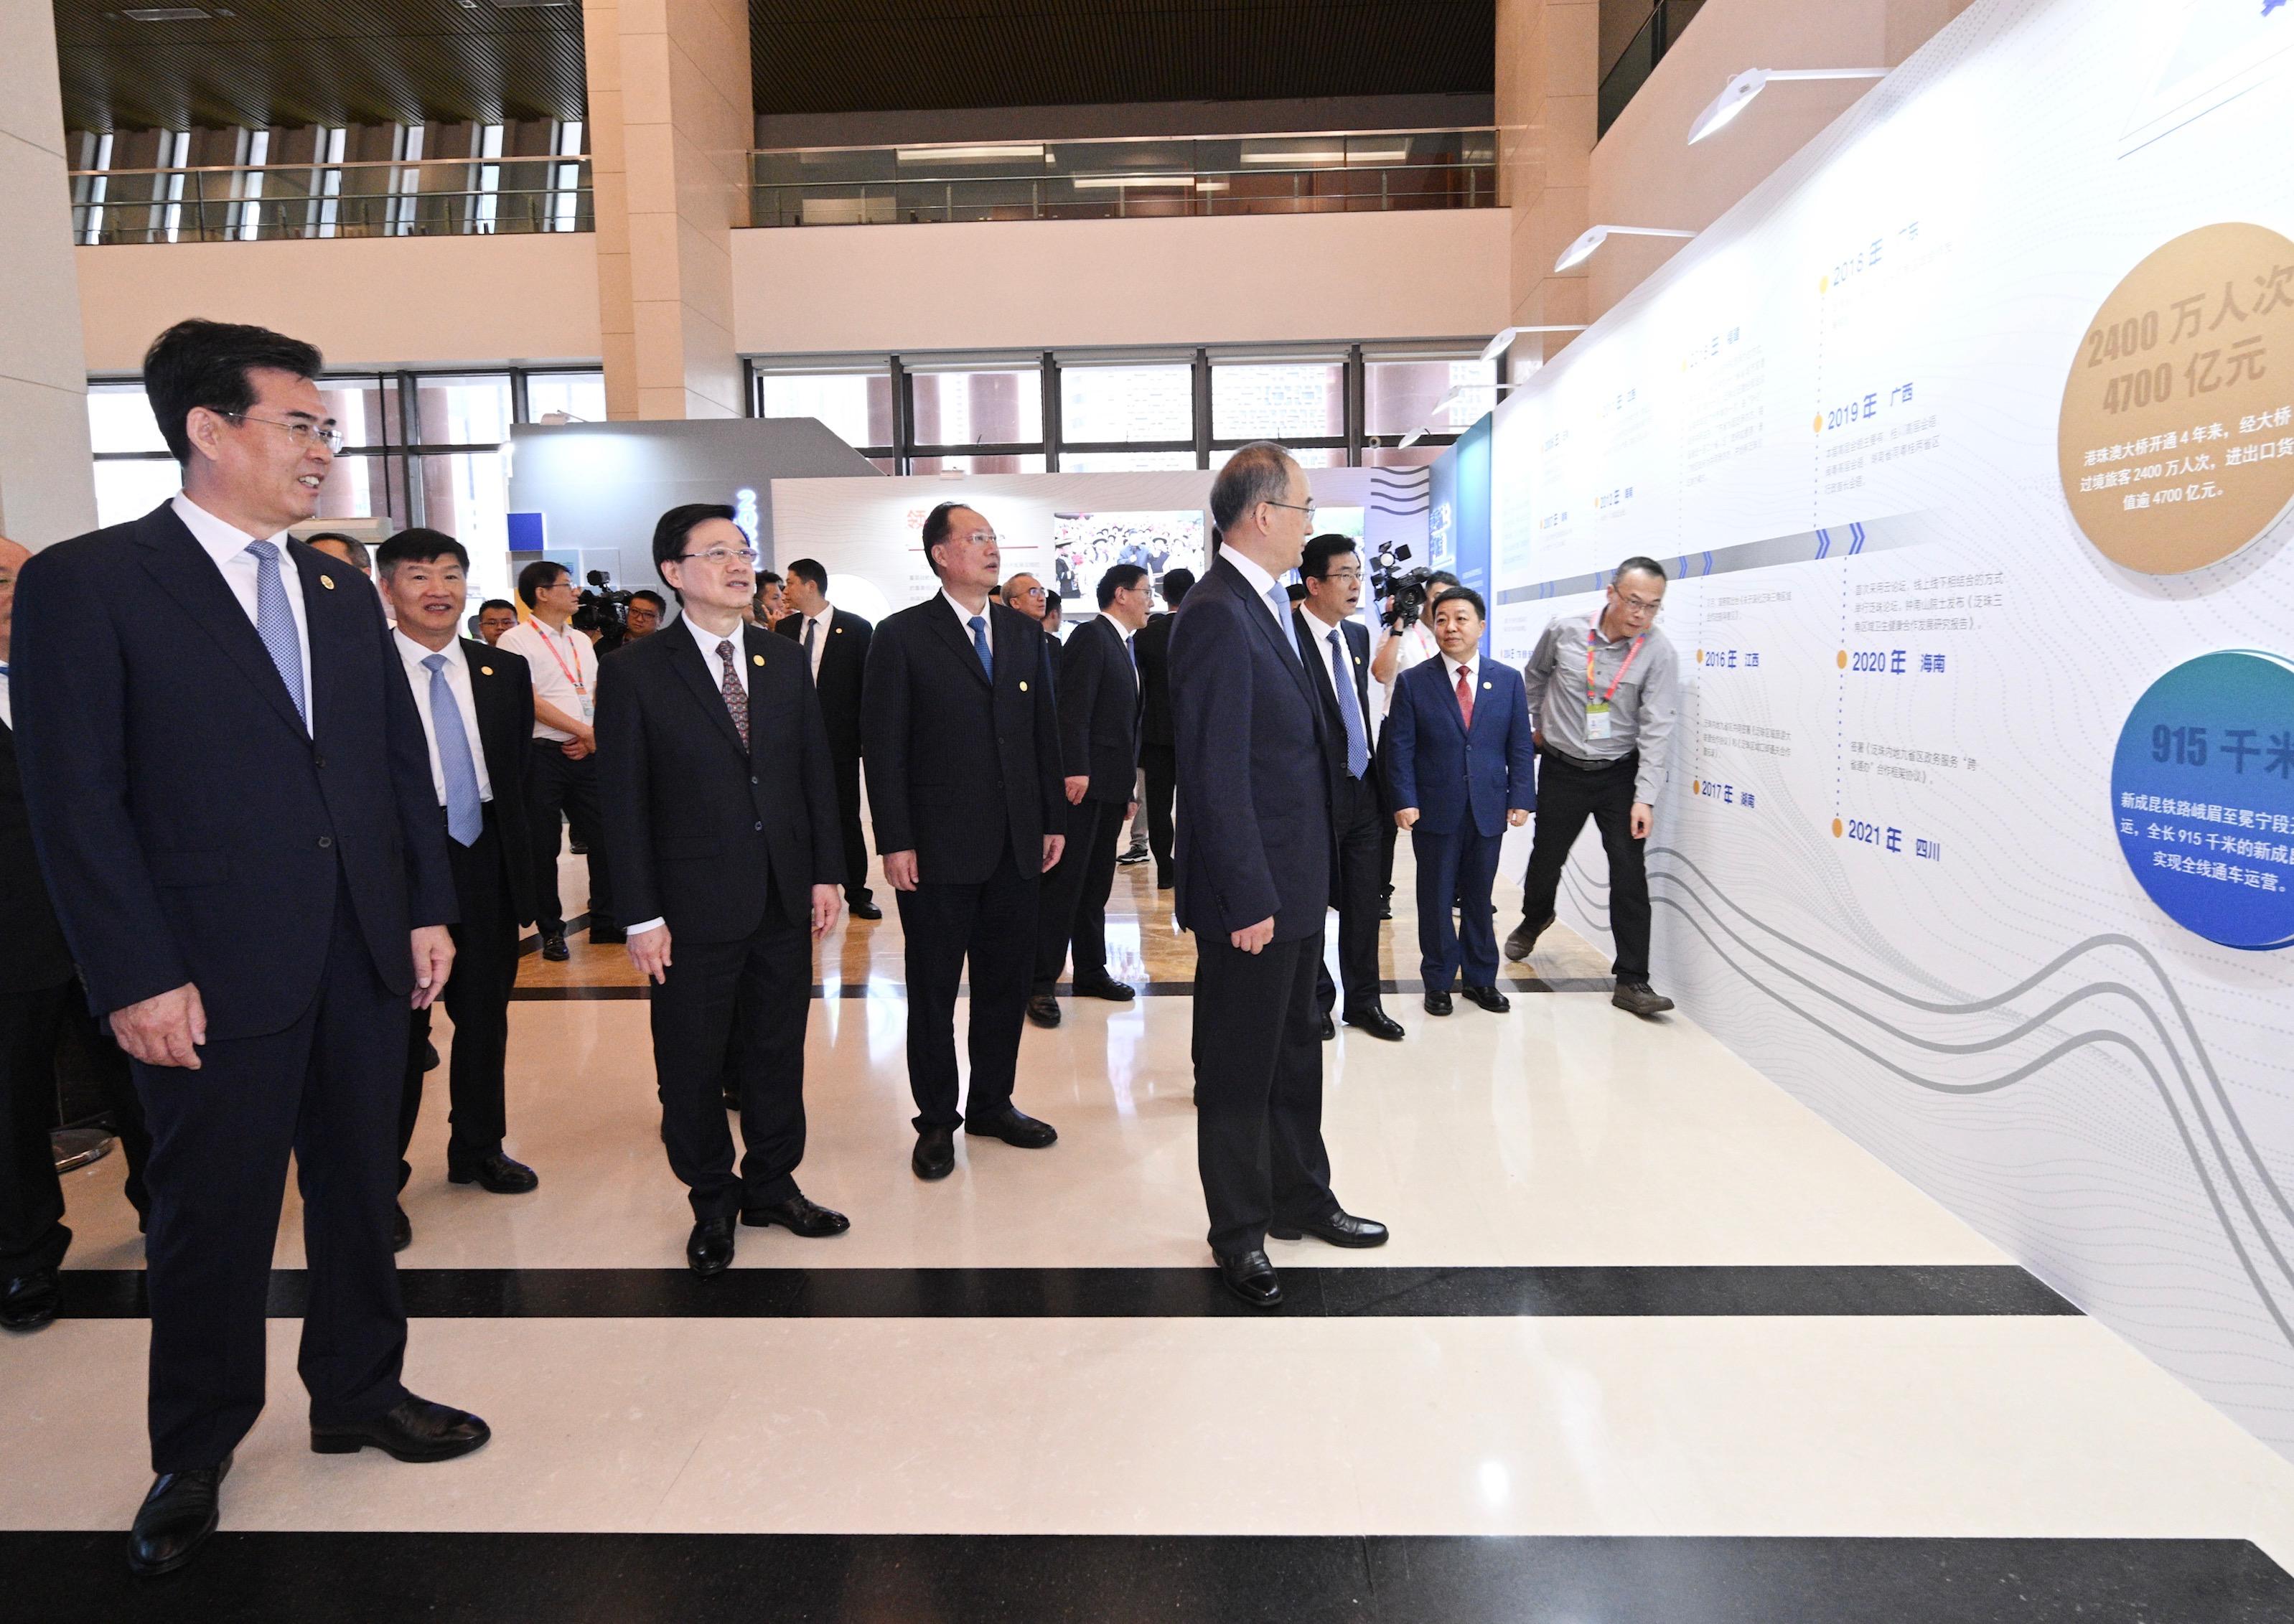 The Chief Executive, Mr John Lee, led a delegation of the Hong Kong Special Administrative Region Government to attend the 2023 Pan-Pearl River Delta Regional Co-operation Chief Executive Joint Conference in Guiyang today (July 7). Photo shows Mr Lee (third left) visiting a photo exhibition on the Conference.